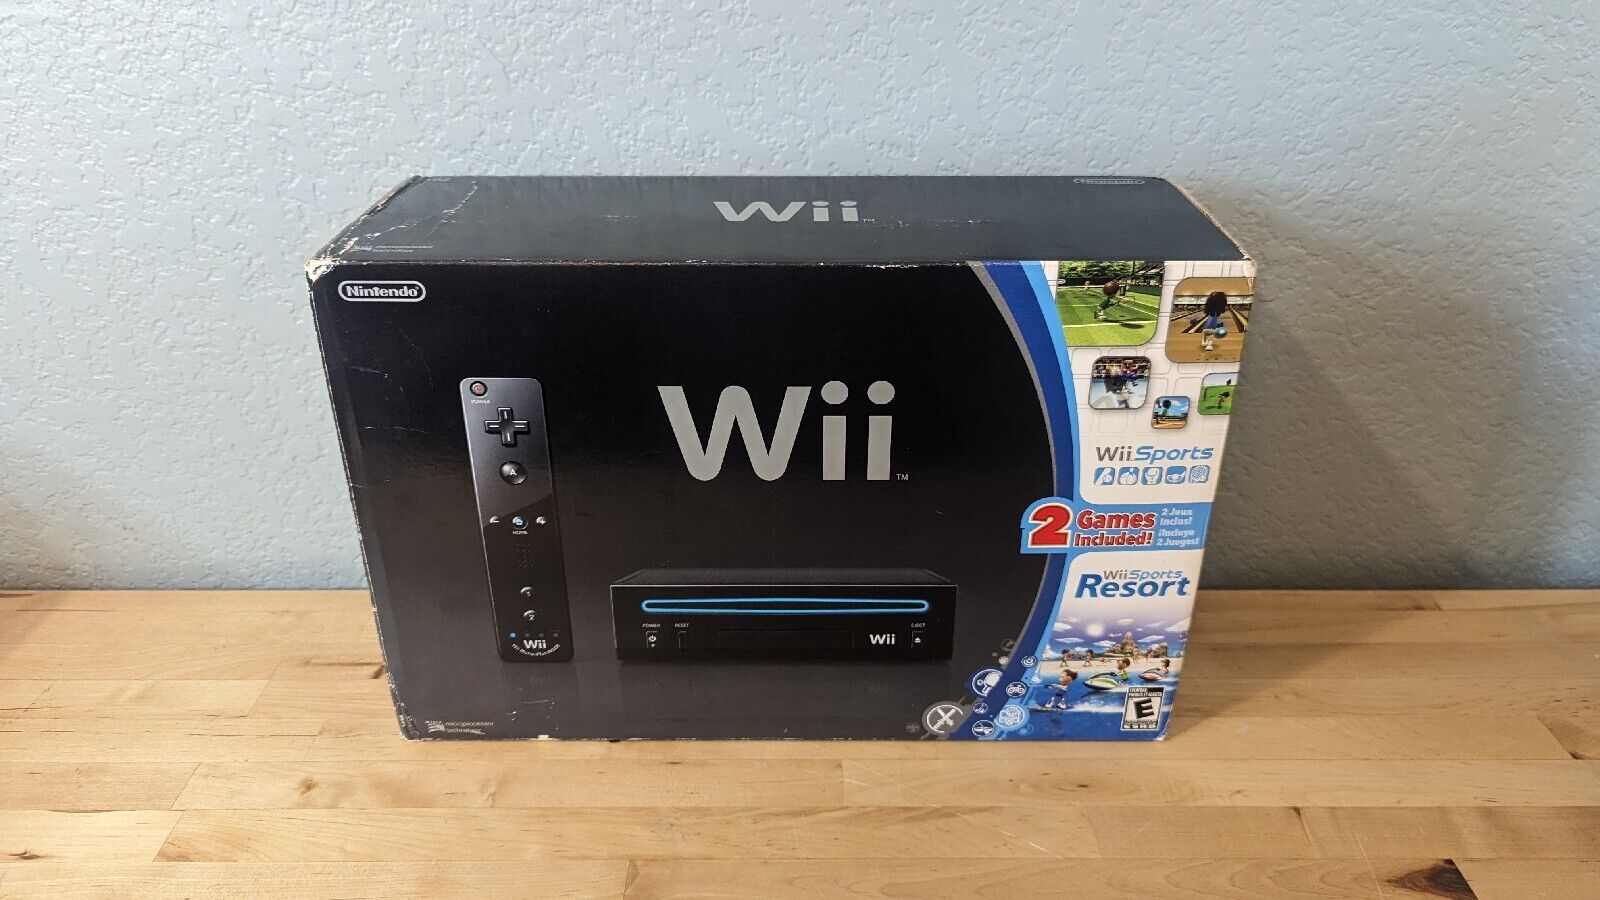 BRAND NEW Nintendo Wii Console Black Wii Sports + Resort Bundle NEVER UNBOXED